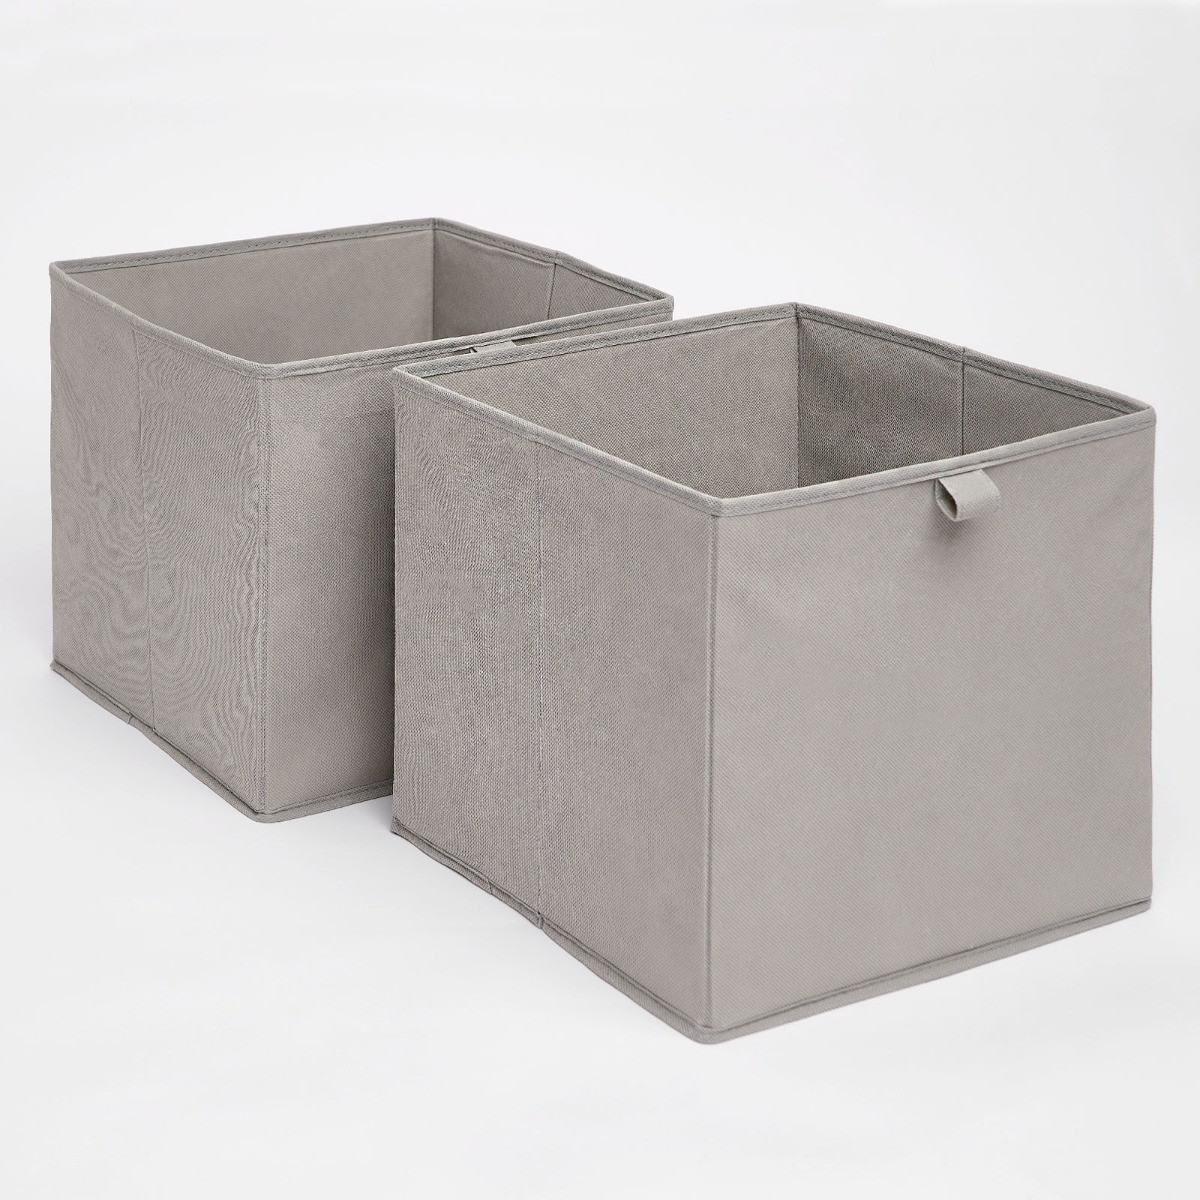 OHS Plain Cube Storage Boxes, Silver Grey - 2 pack>